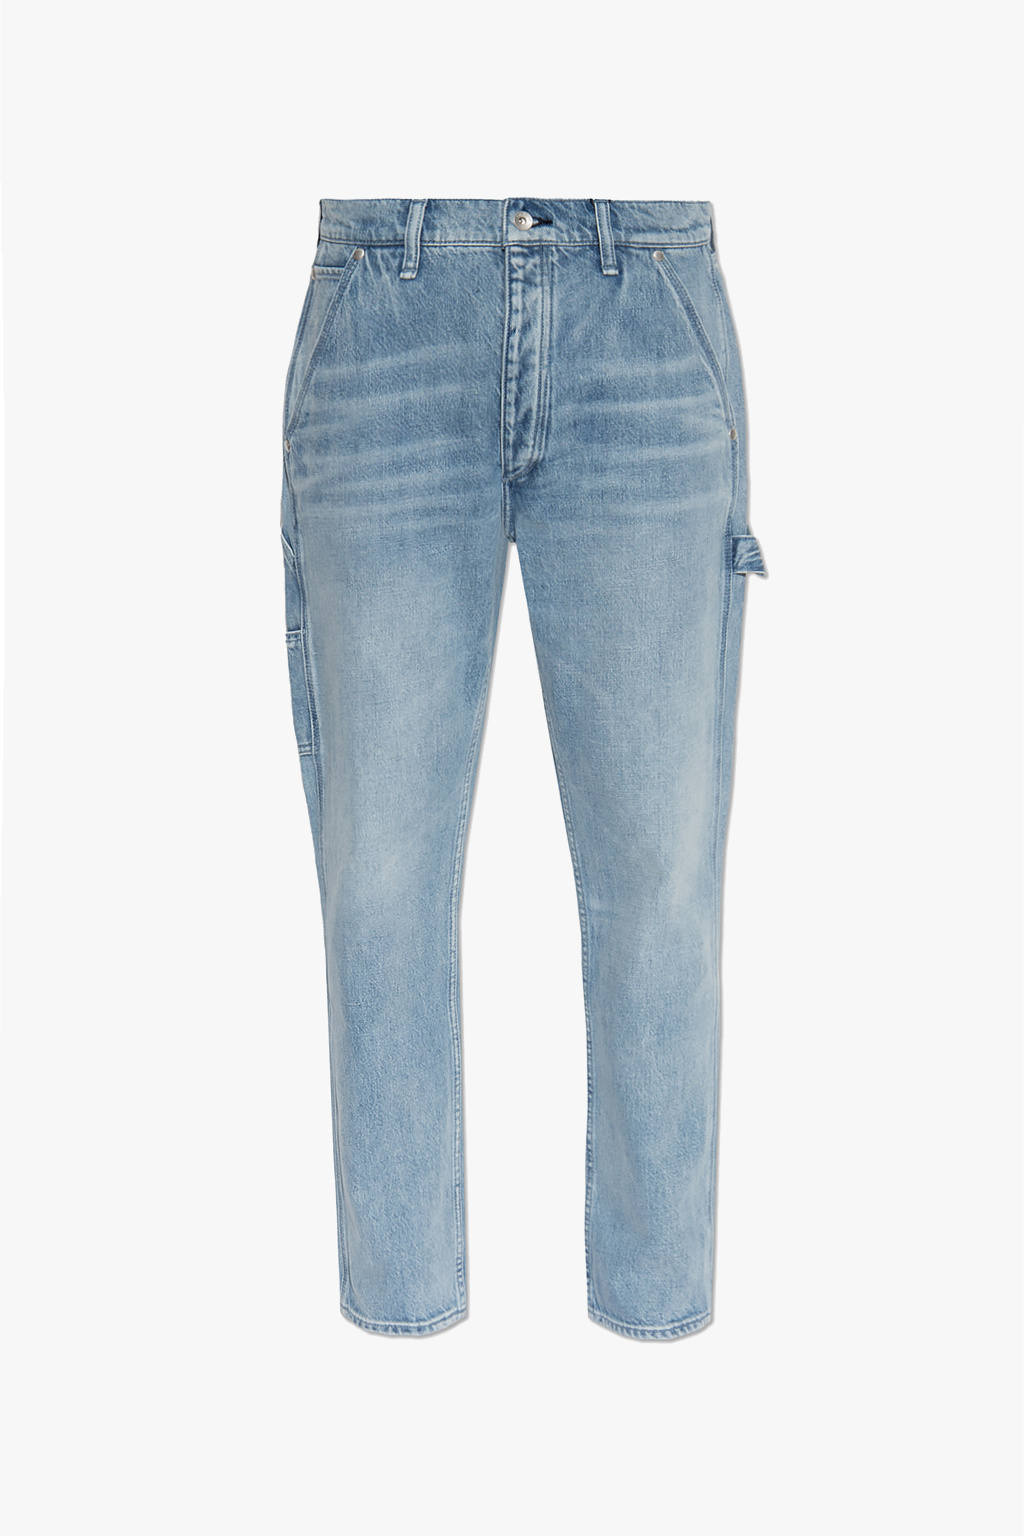 Blue High Rise Carrot Leg Jeans, Blue from Missguided on 21 Buttons